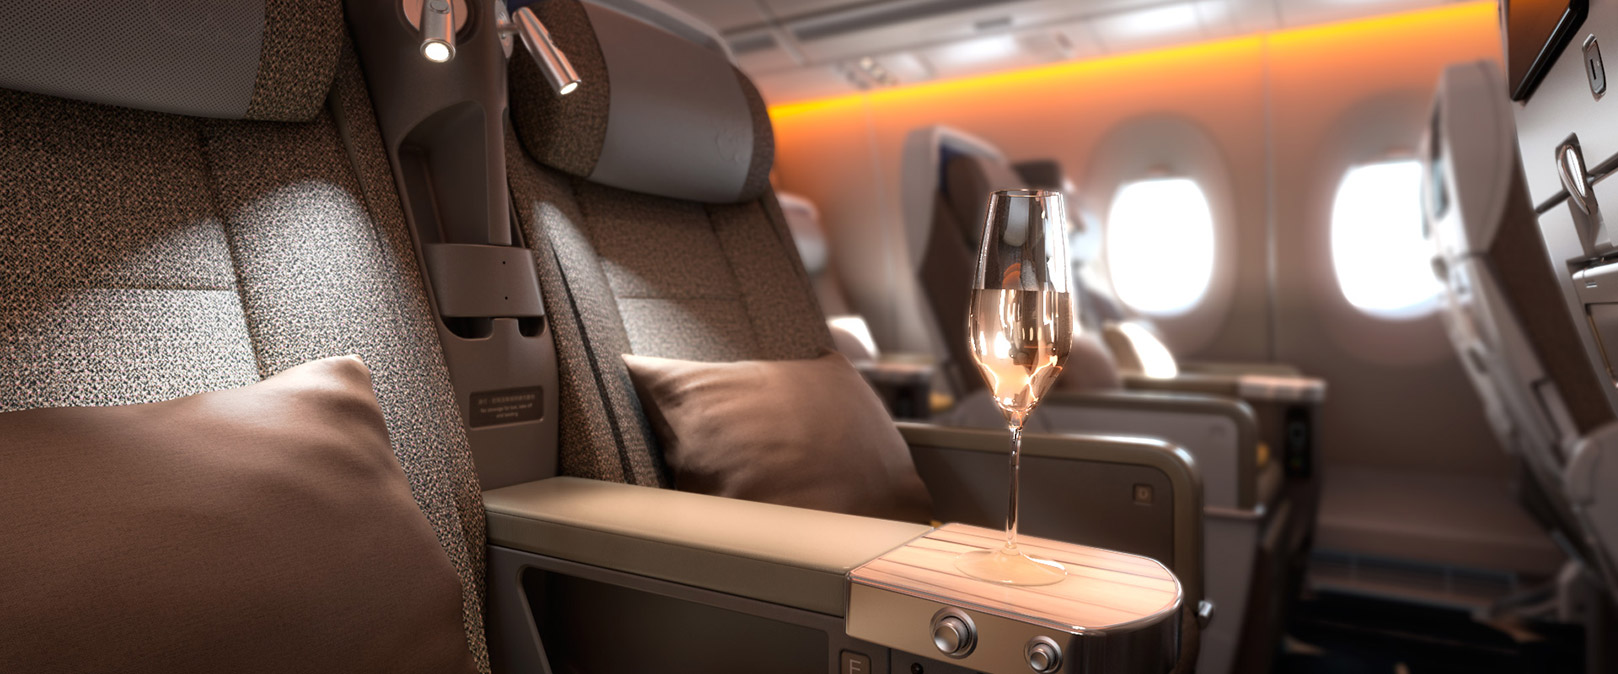 China Airlines Premium Economy official photo